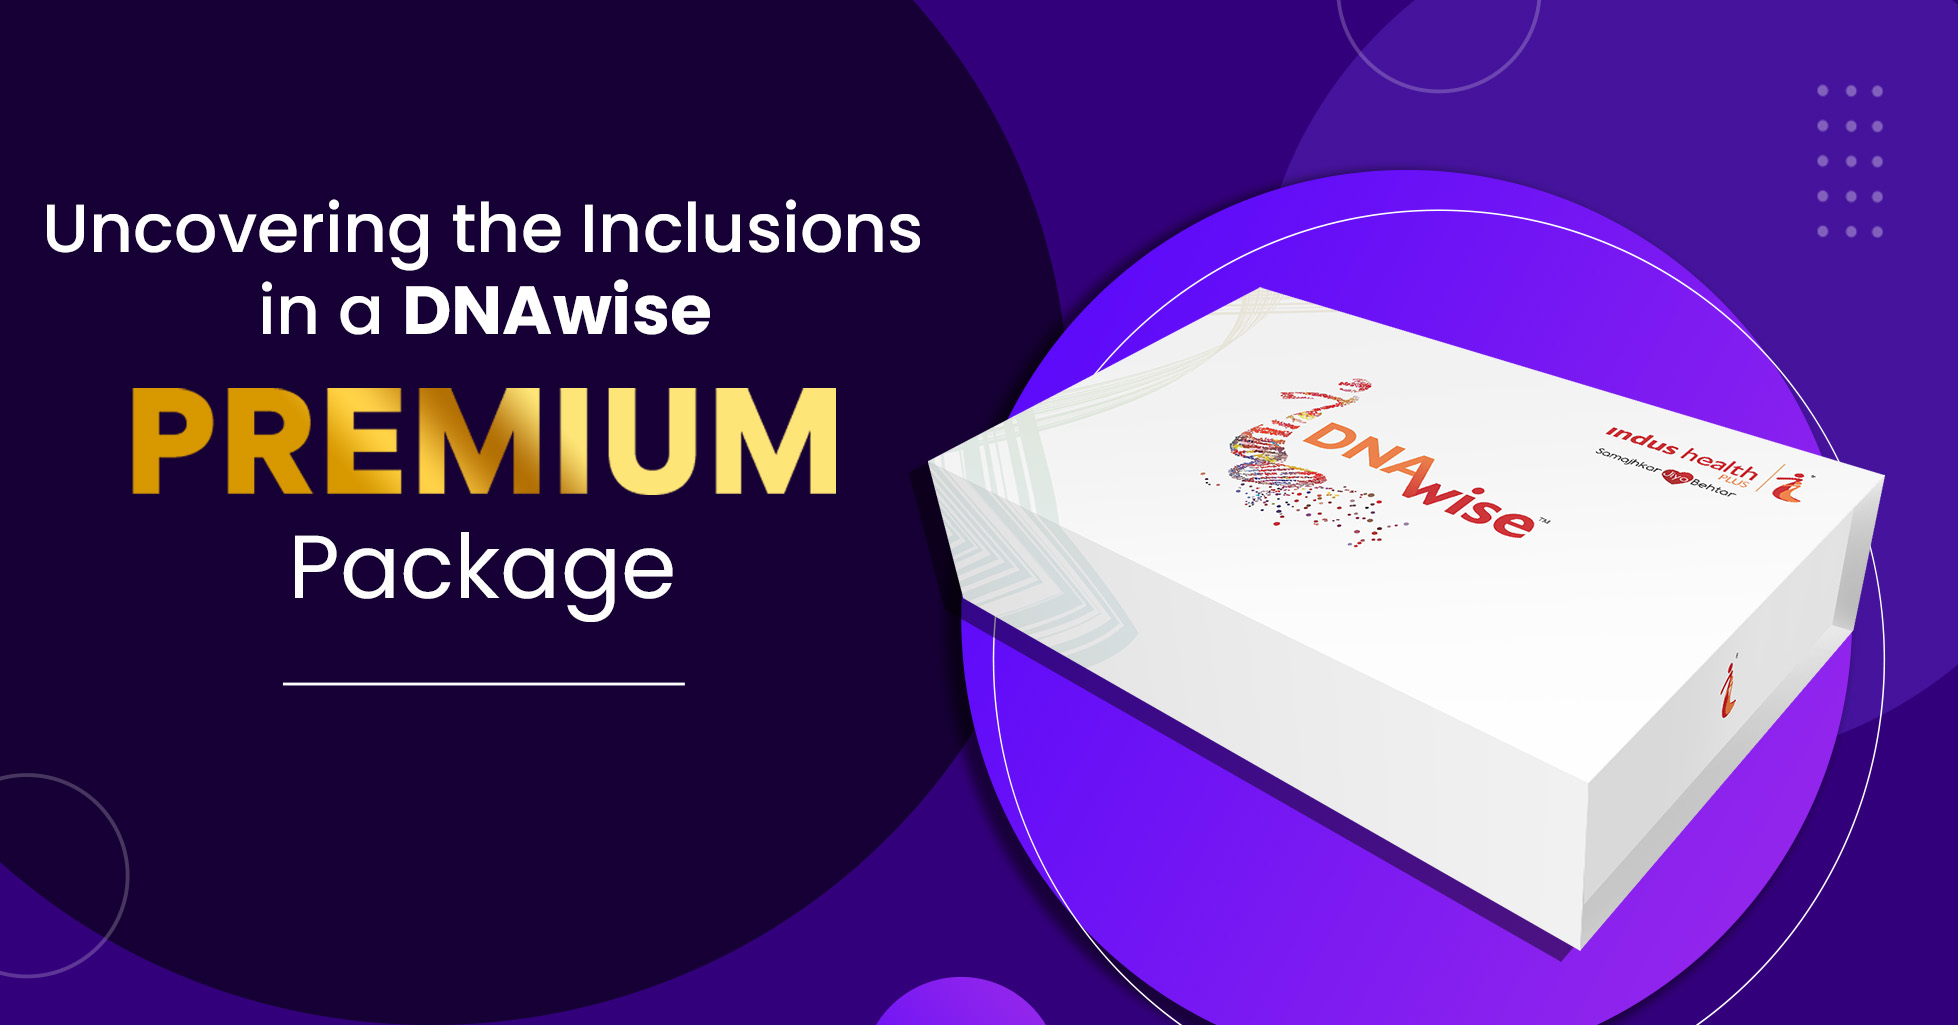 What's covered in a DNAwise Premium Package?